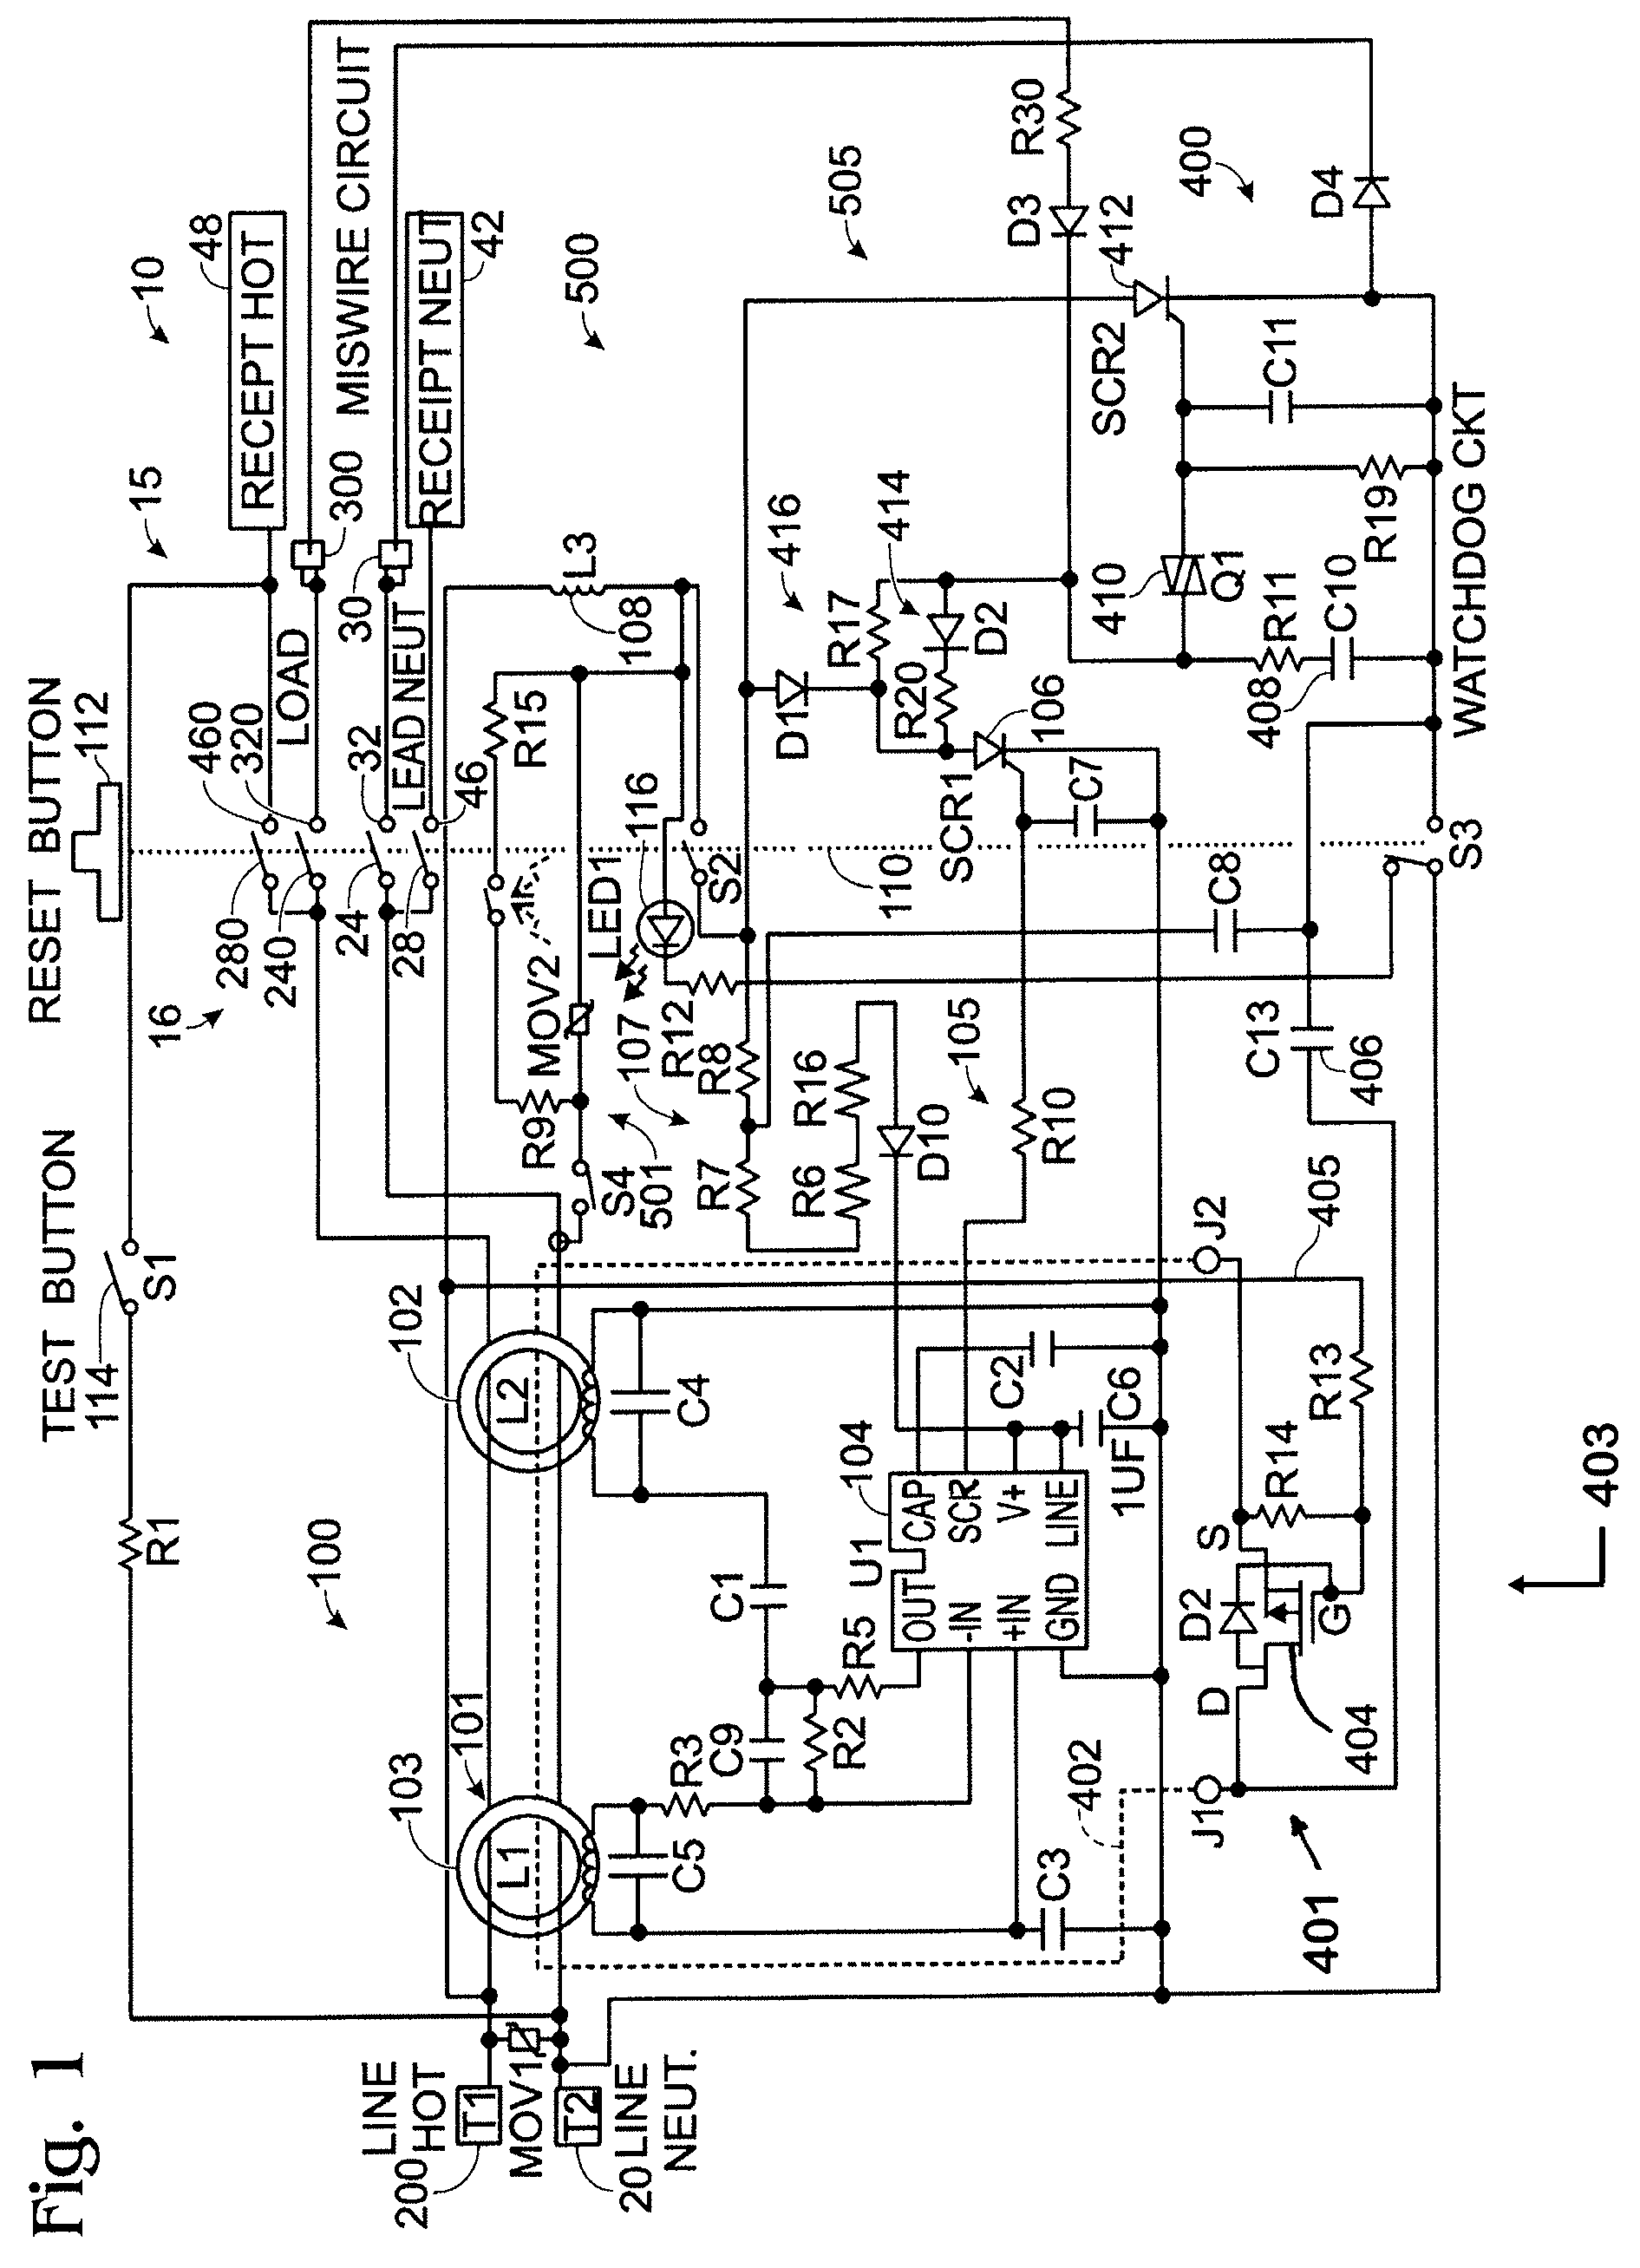 Electrical wiring device with protective features